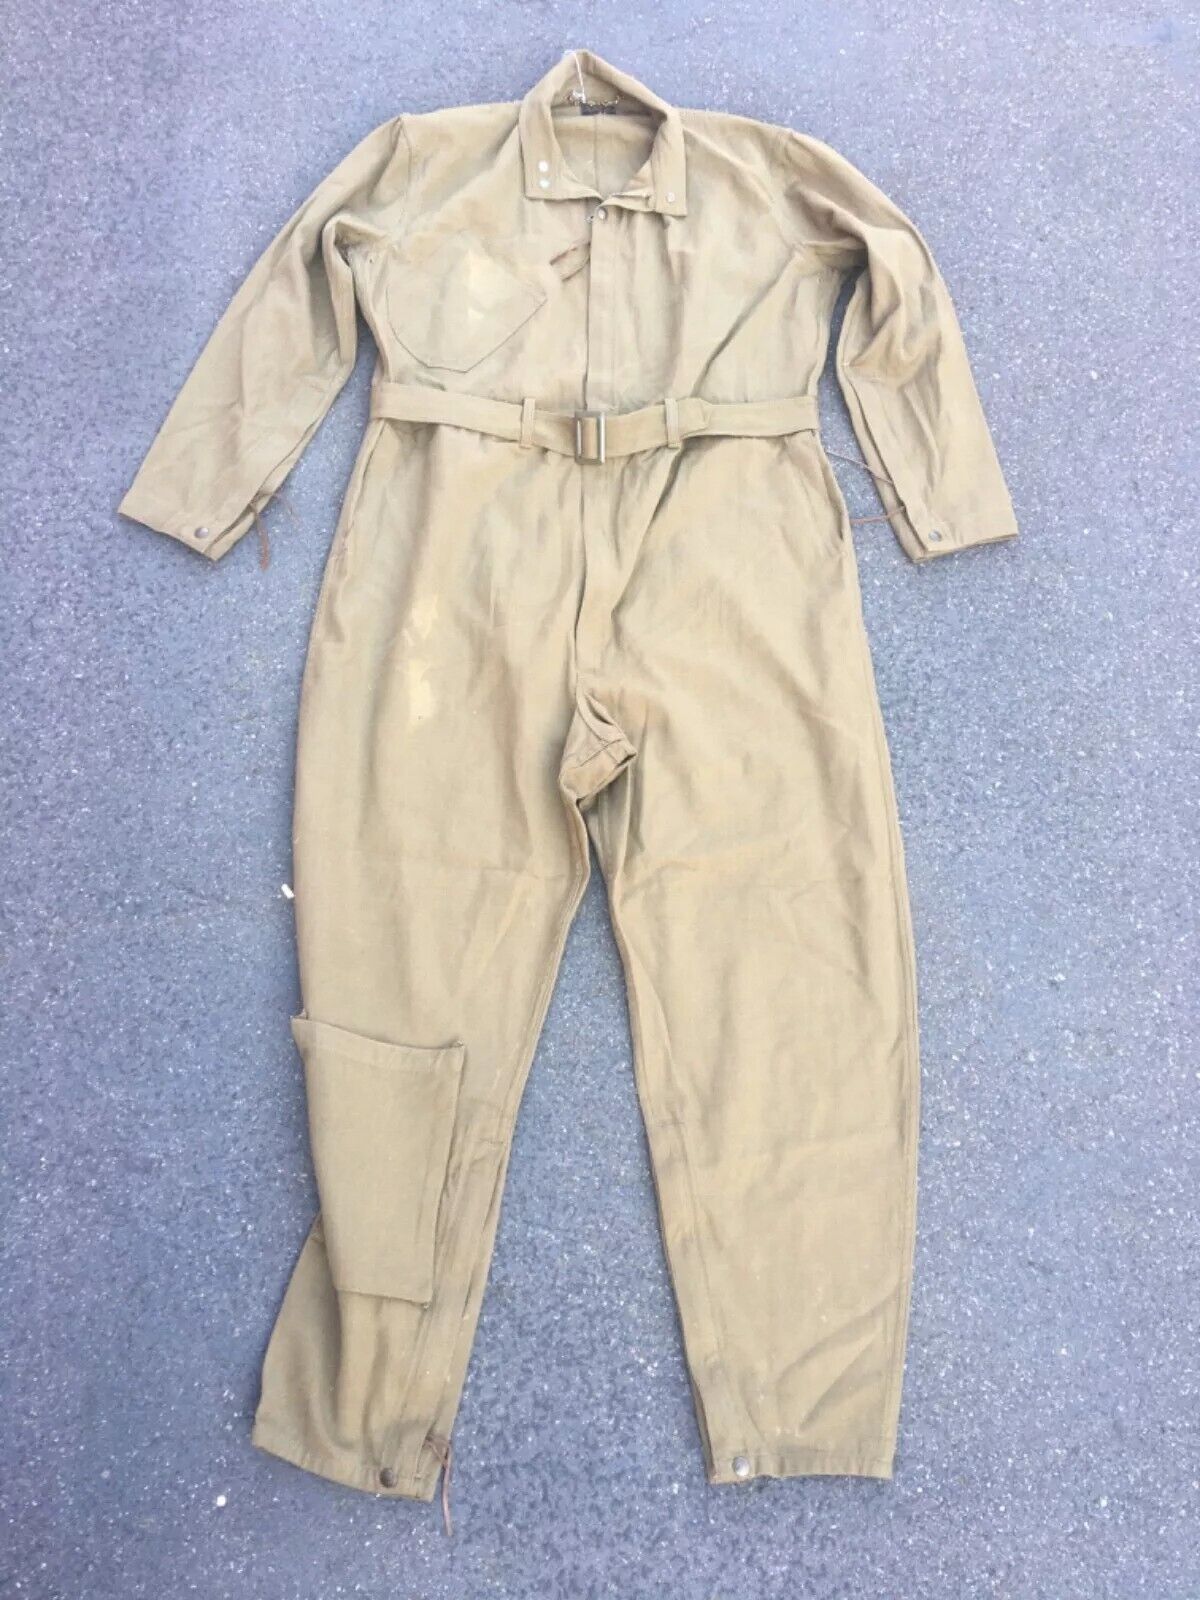 WWII USAAF A-4 Flight Flying Suit Rare Size 46 Military 1940s